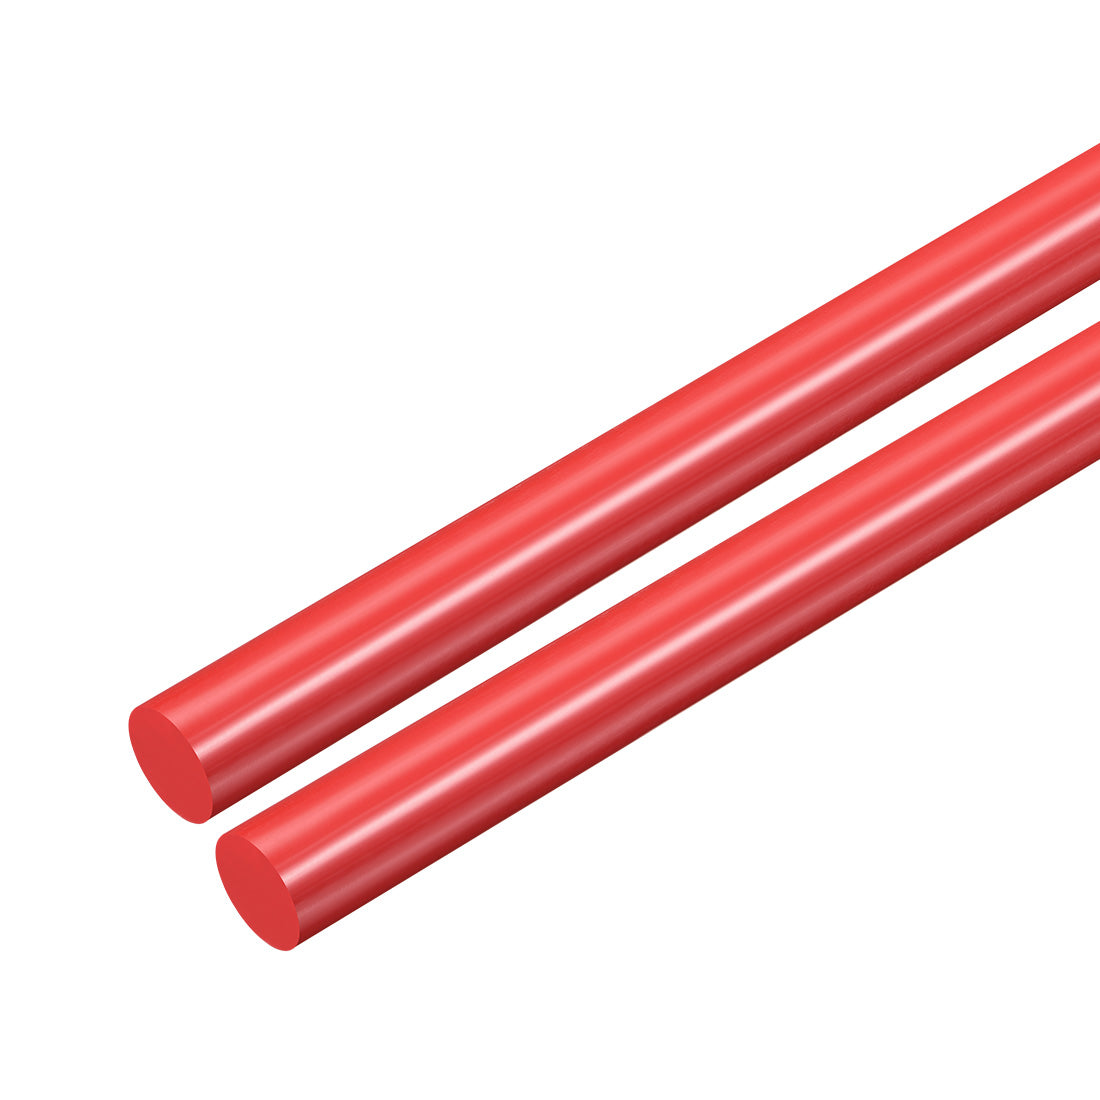 uxcell Uxcell Plastic Round Rod,8mm Dia 50cm Red Engineering Plastic Round Bar 2pcs